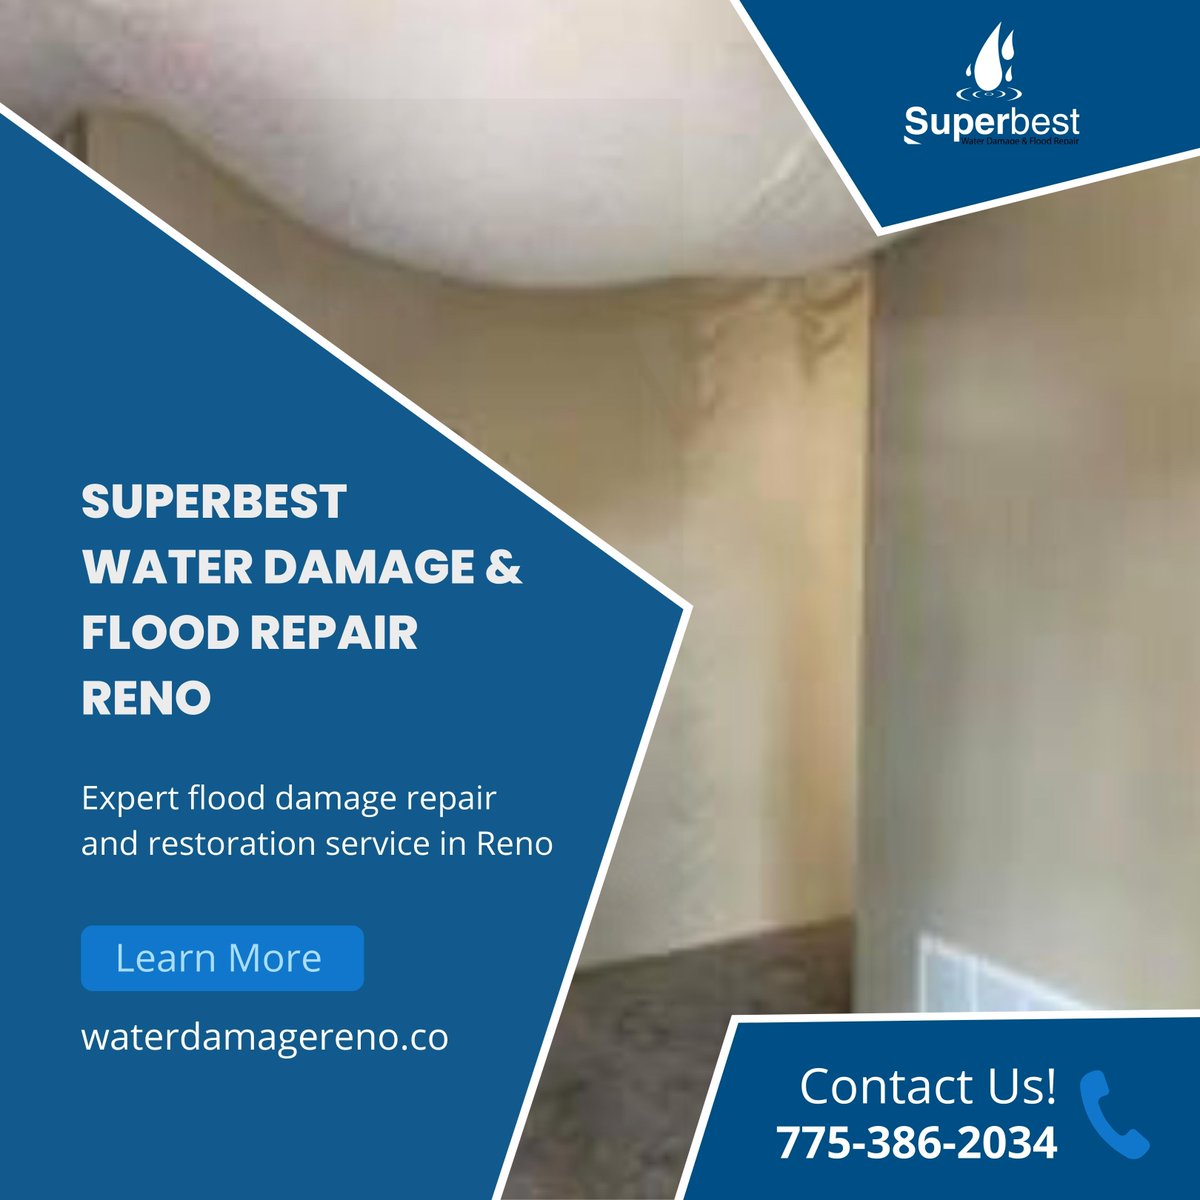 We don't just repair the damage; we rebuild and restore–because flood restoration is so much more than a temporary fix.

Call us: 775 386 2034
Visit us waterdamagereno.co
280 BRINKBY AVE Suite 205, RENO, NV 89509

#FloodRepair #RepairingHomes #GetHelpFast #RebuildingLives